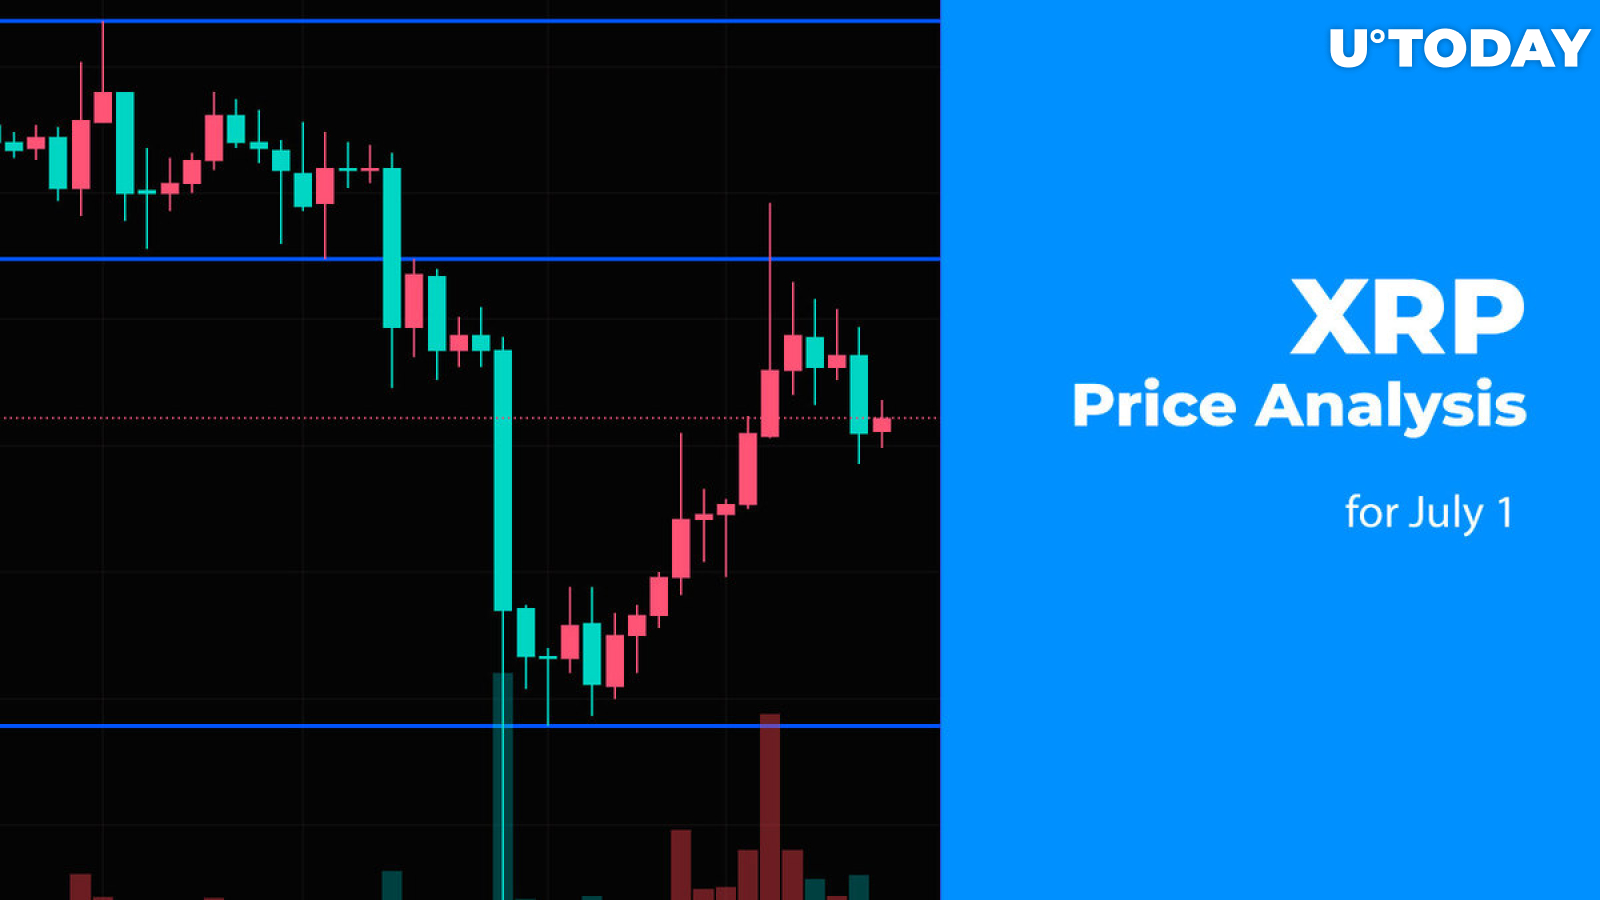 XRP Price Analysis for July 1